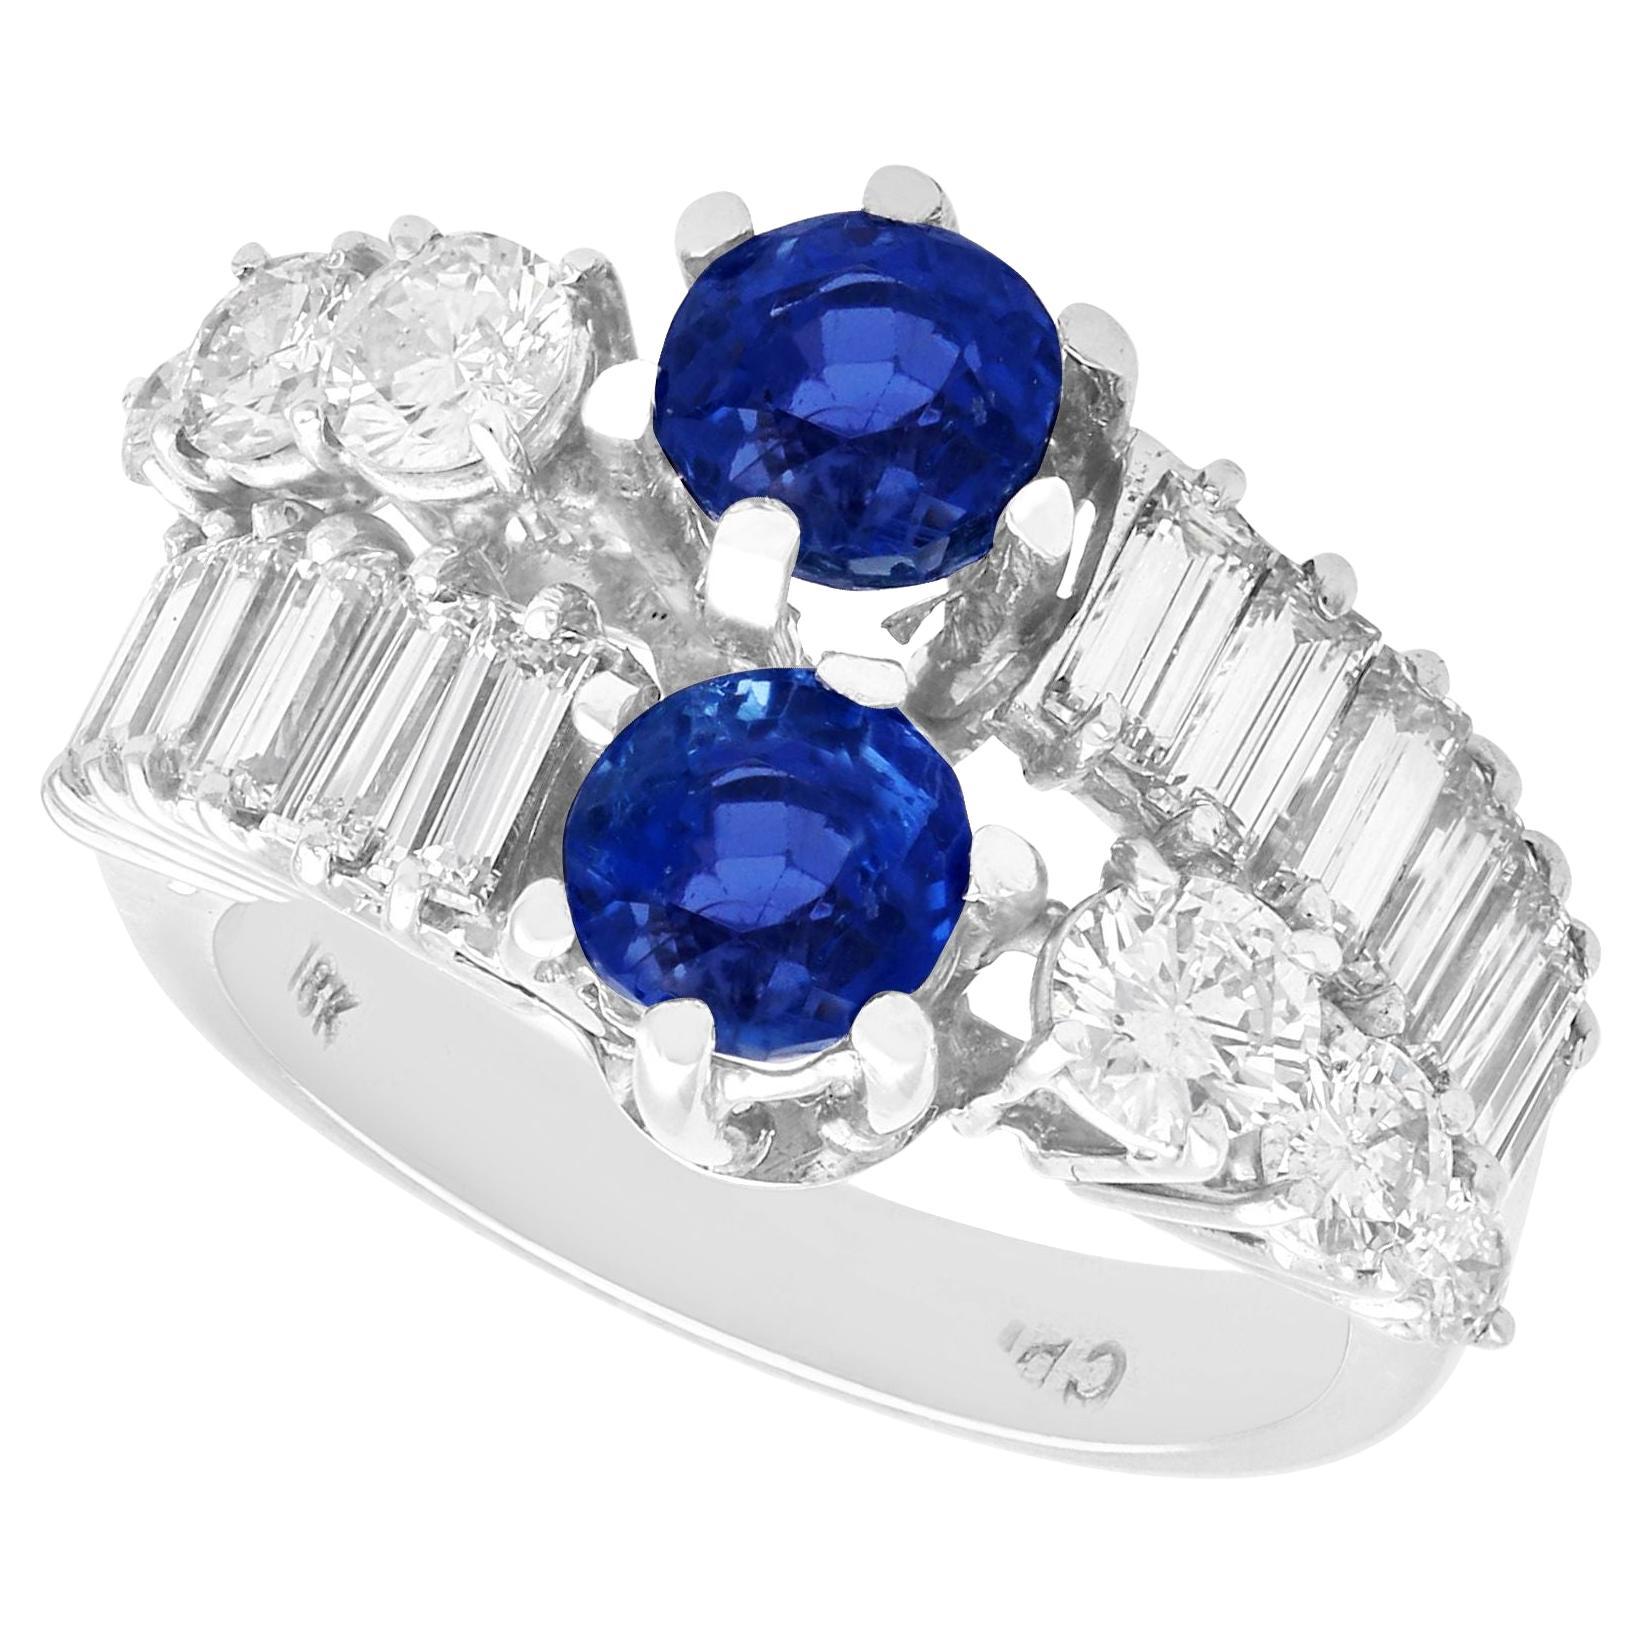 Vintage 1.38ct Sapphire and 2.55ct Diamond 18k White Gold Cocktail Ring For Sale